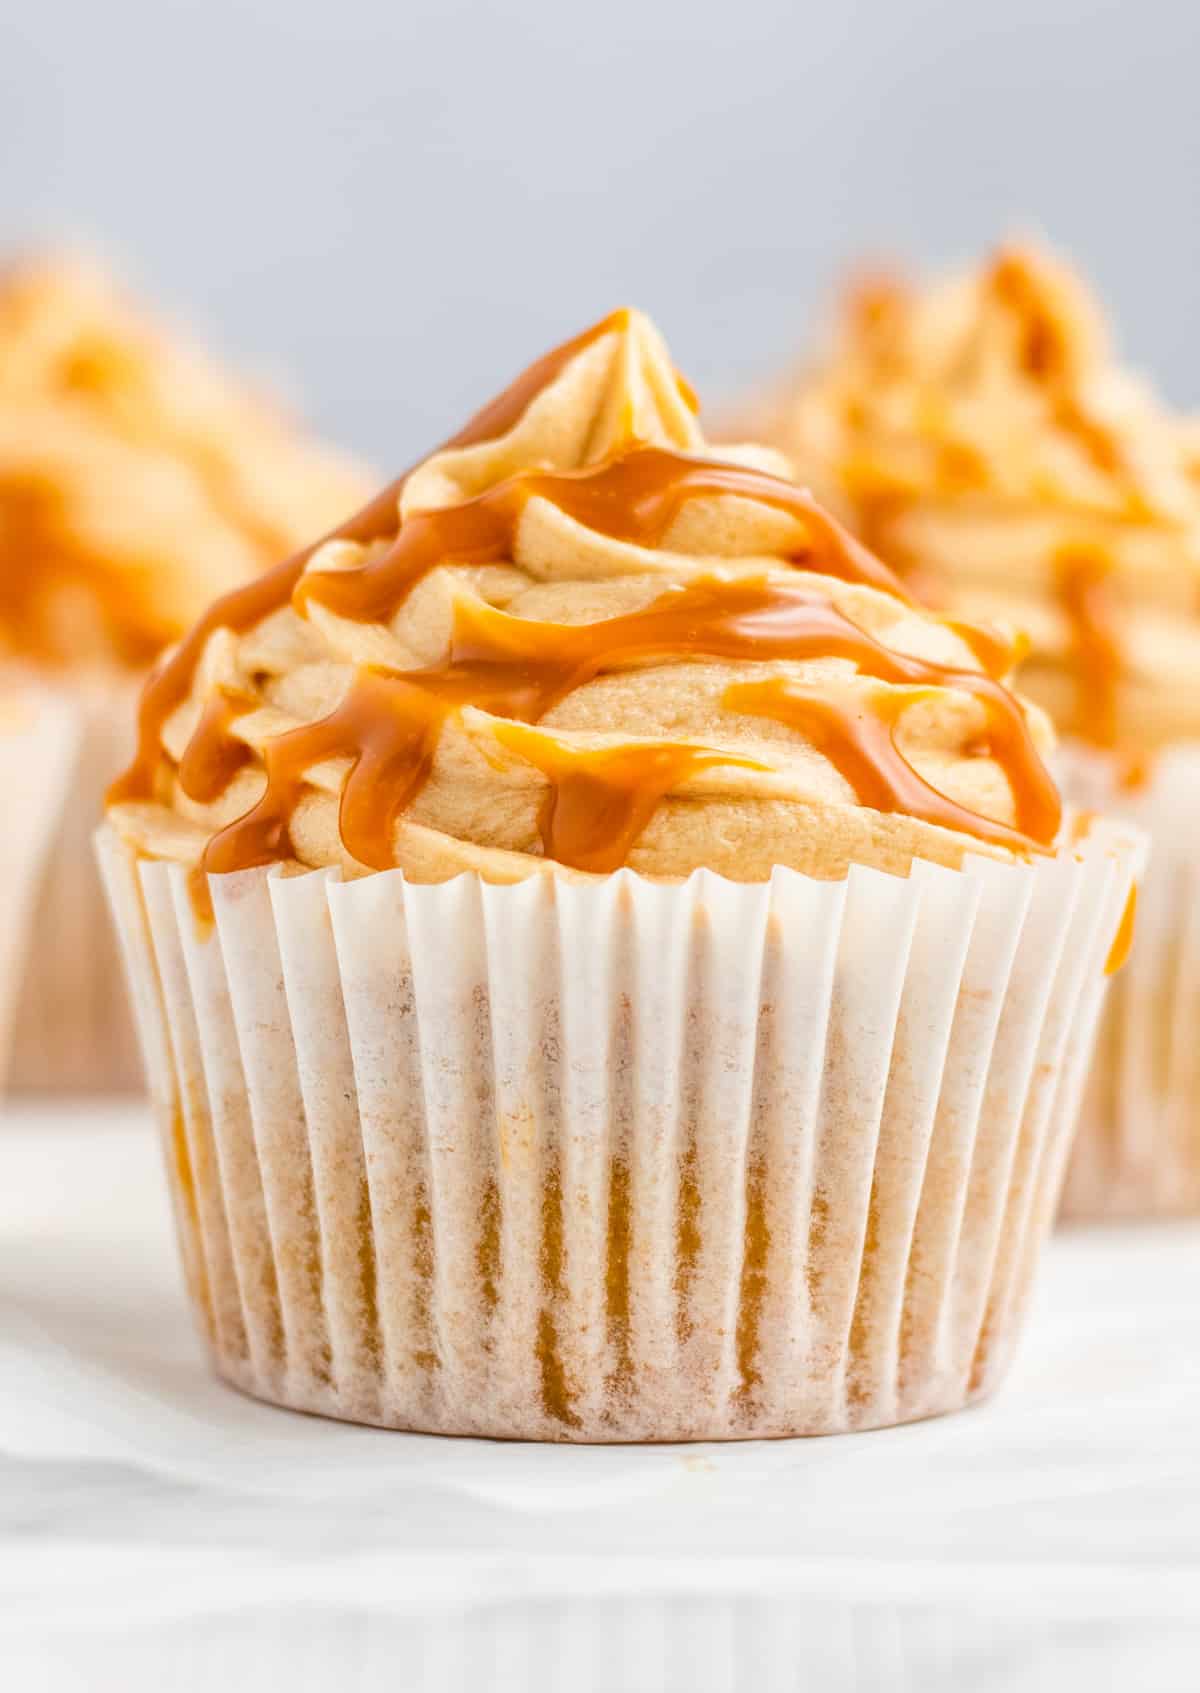 One finished Salted Caramel Cupcake close up frosted and drizzled with salted caramel.